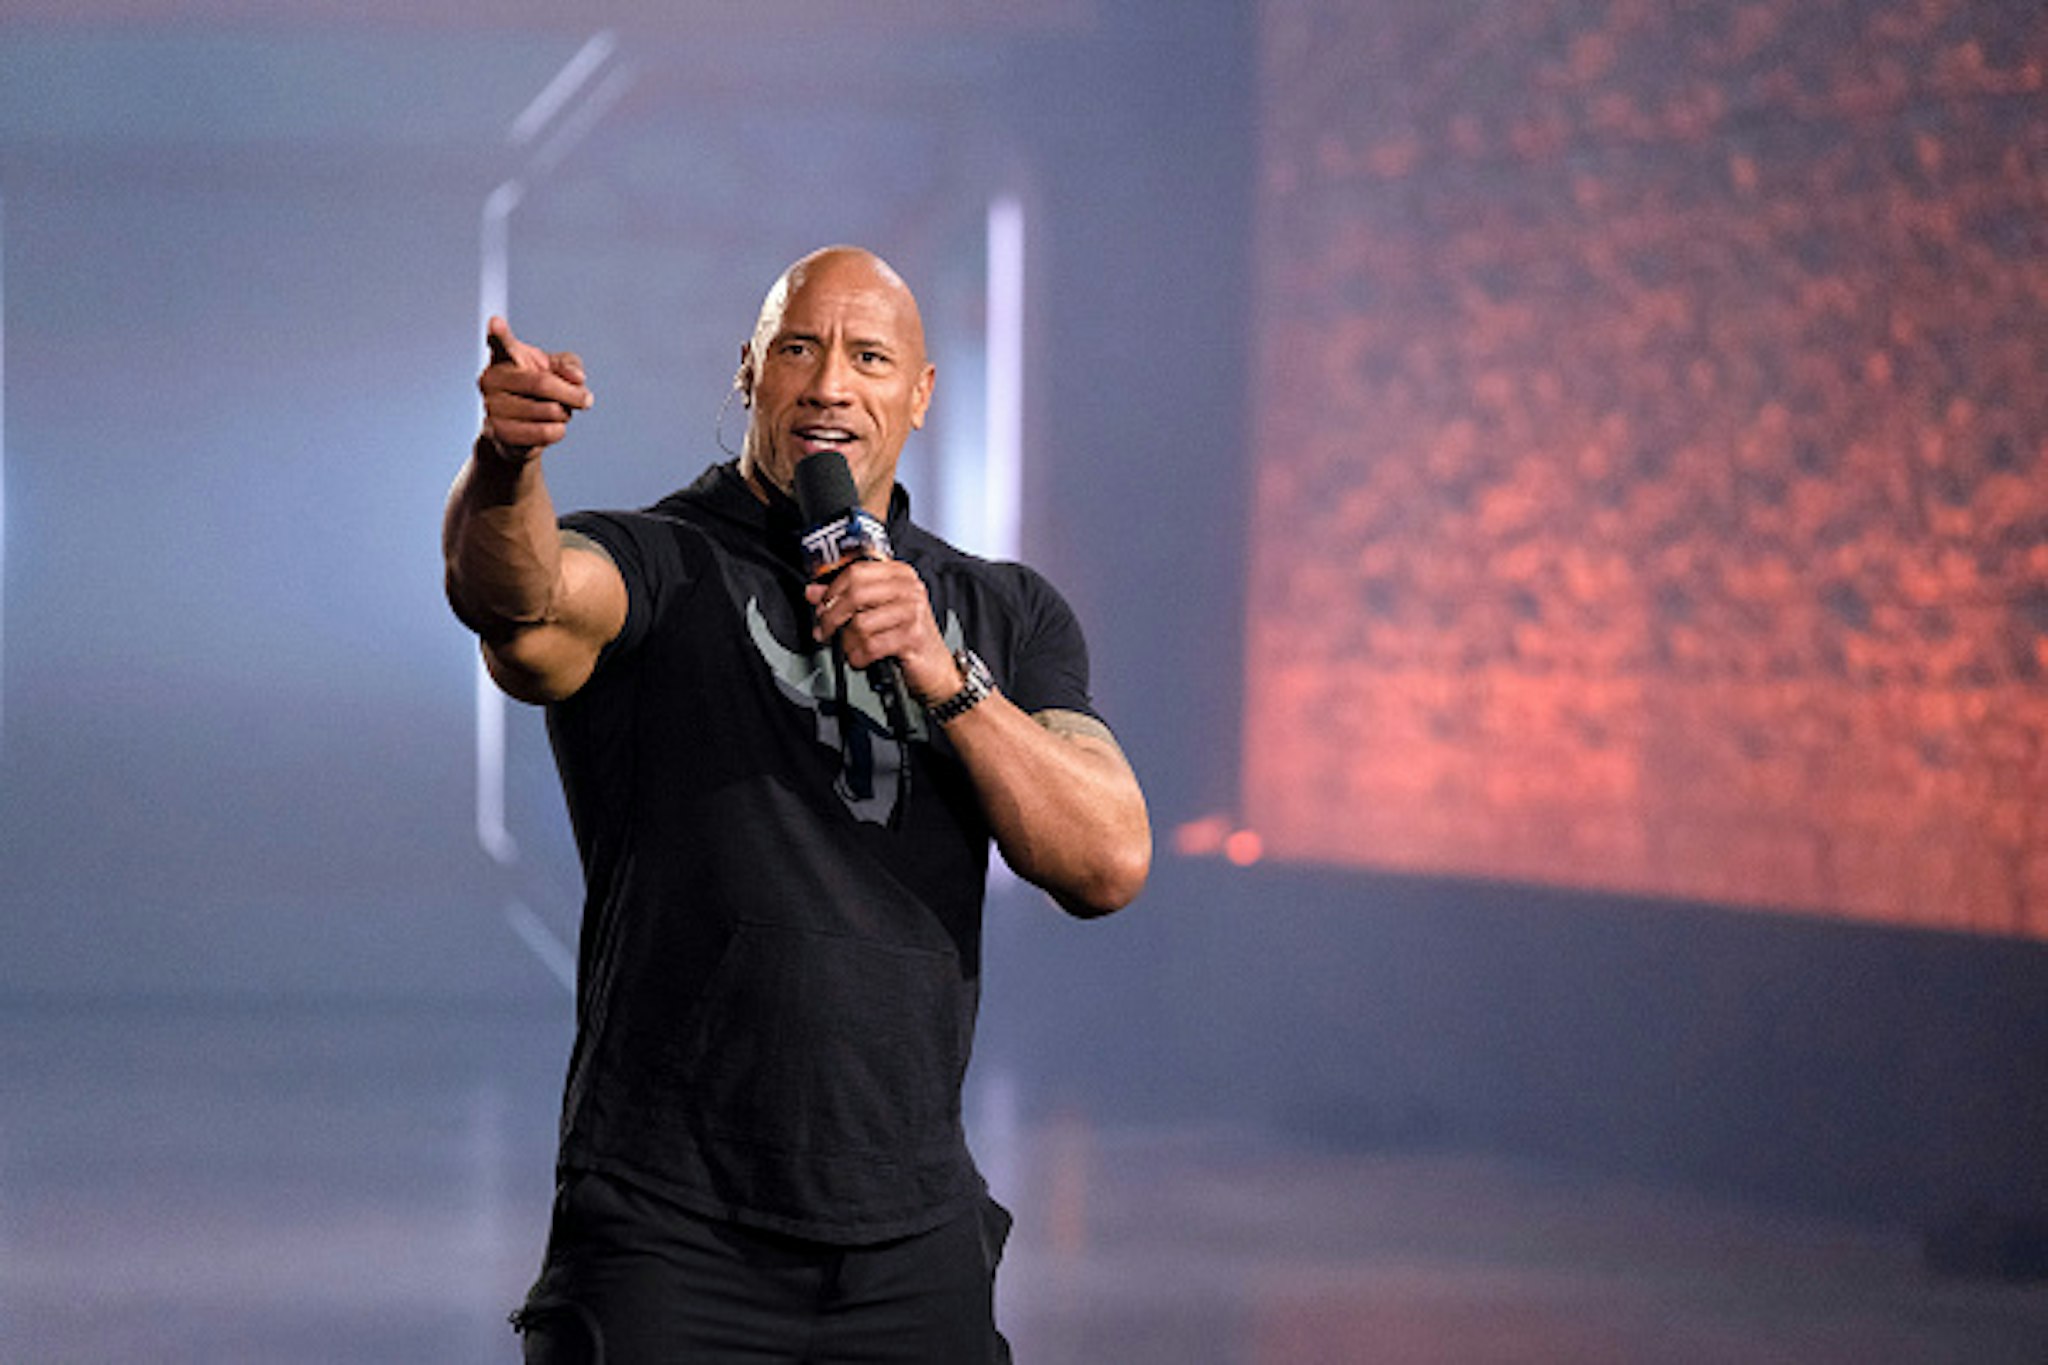 THE TITAN GAMES -- West Region 2: The True Meaning of a Titan Episode 206 -- Pictured: Dwayne Johnson --